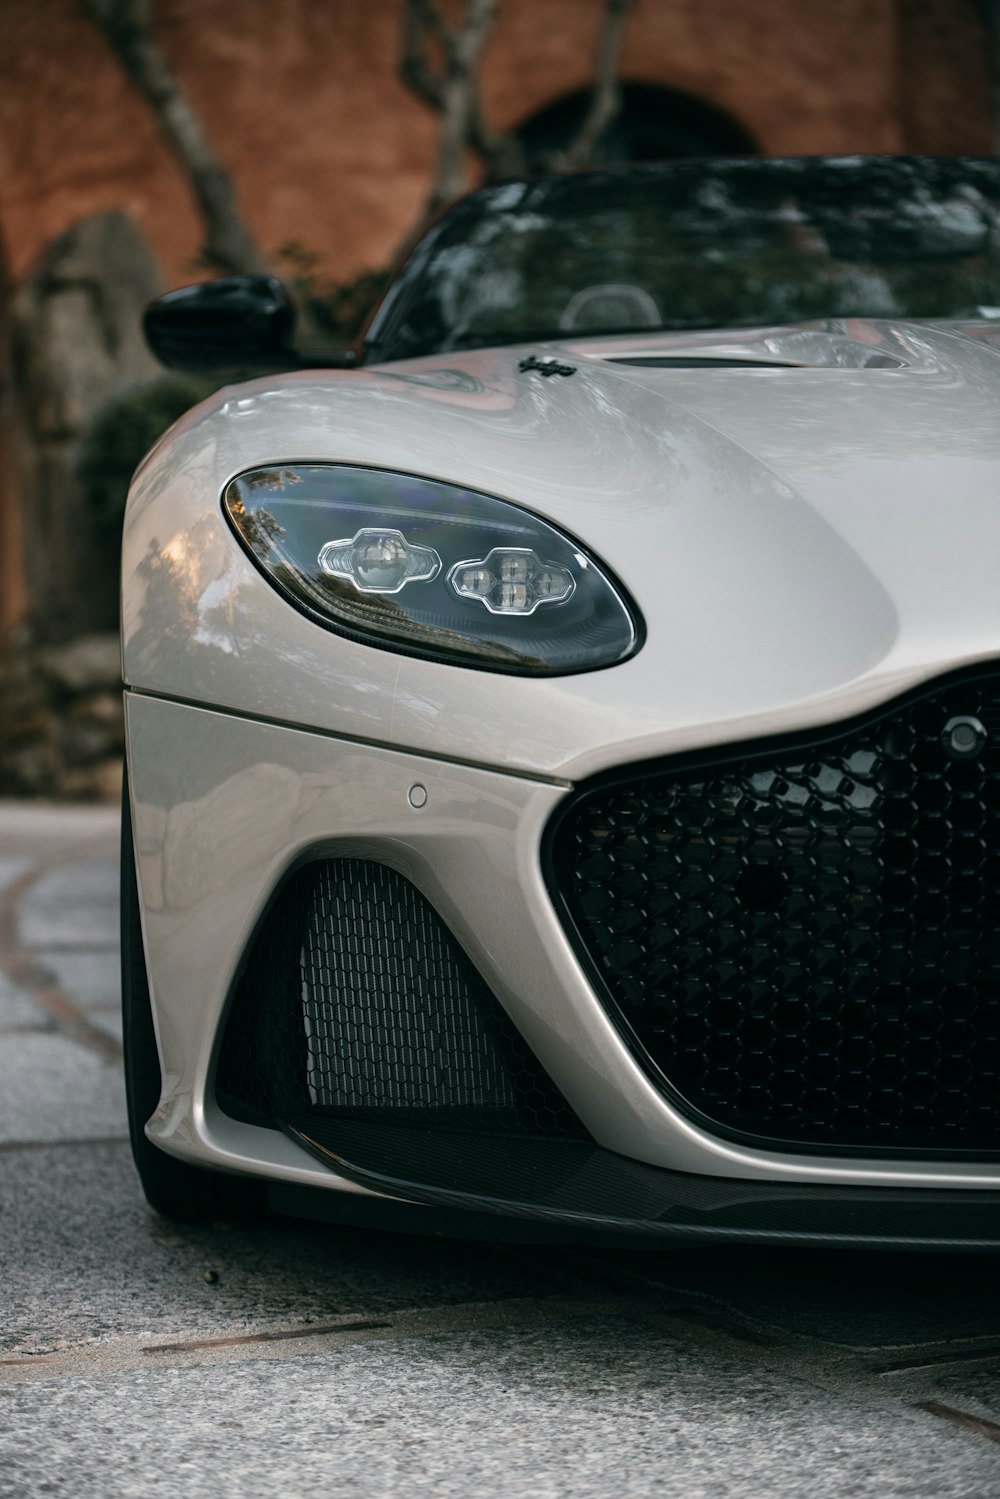 Aston Martin Dbs Pictures | Download Free Images on Unsplash